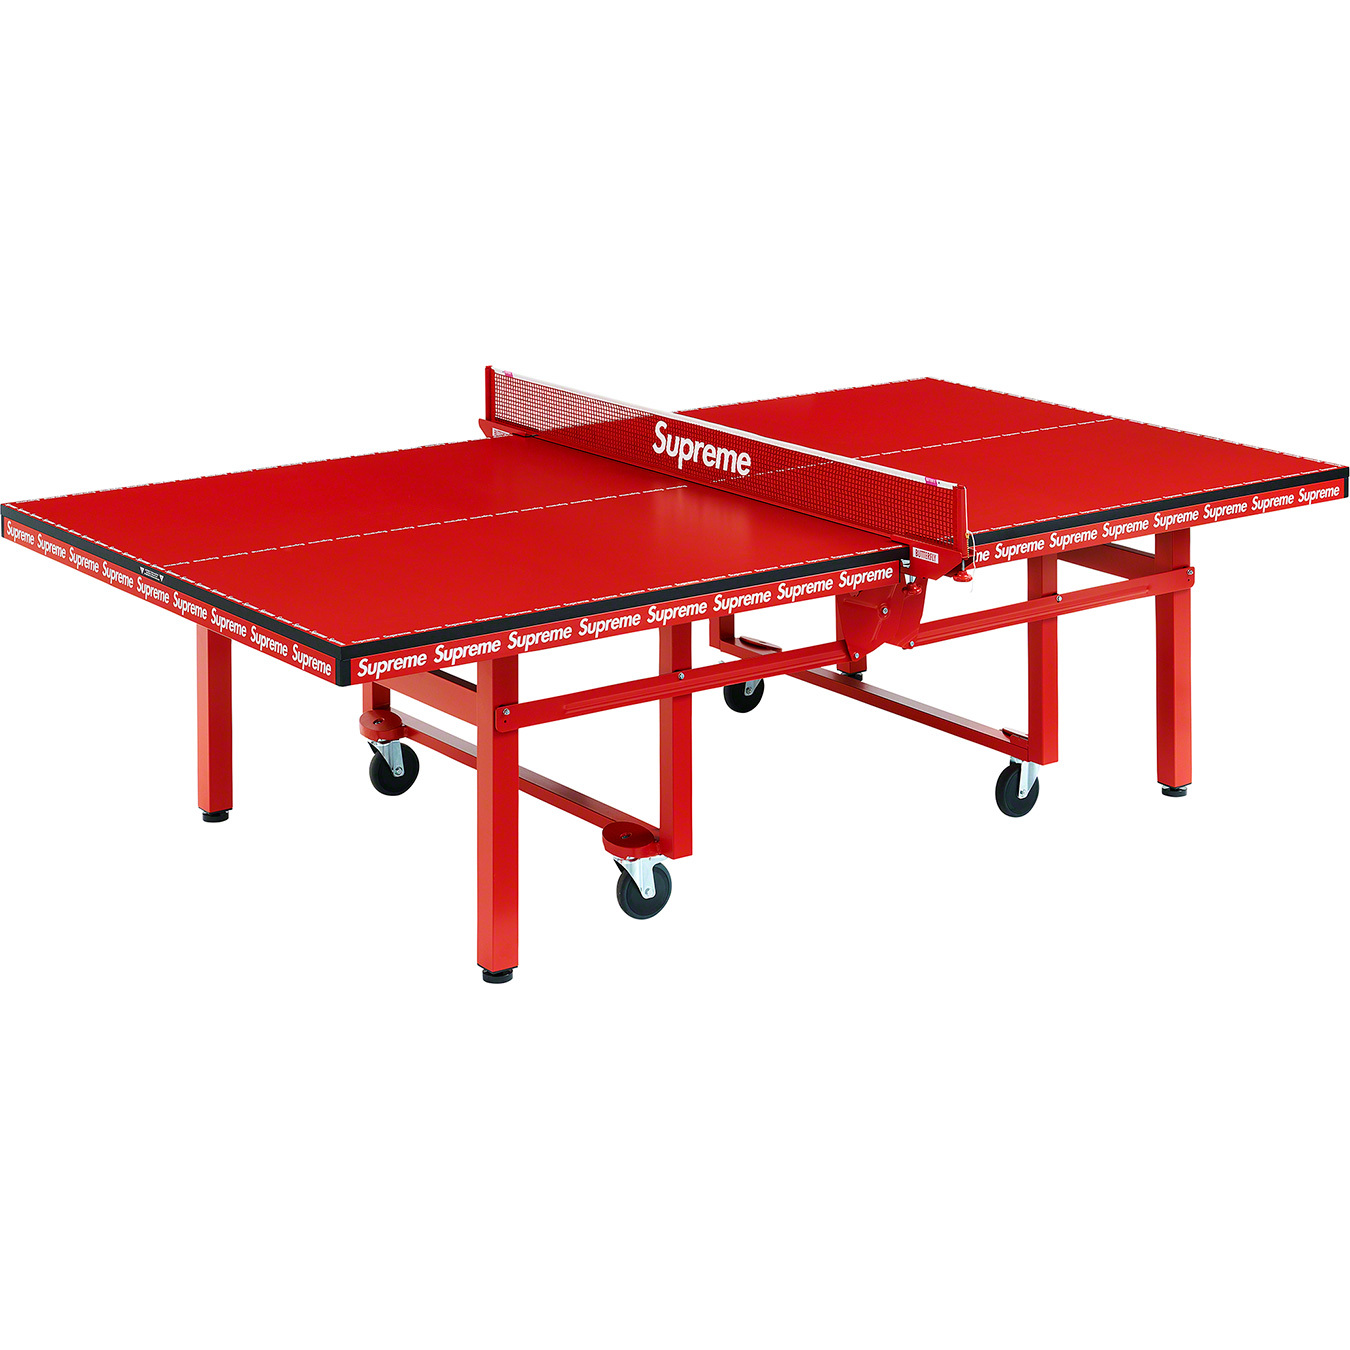 Butterfly Centrefold 25 Indoor Table Tennis Table - fall winter 2021